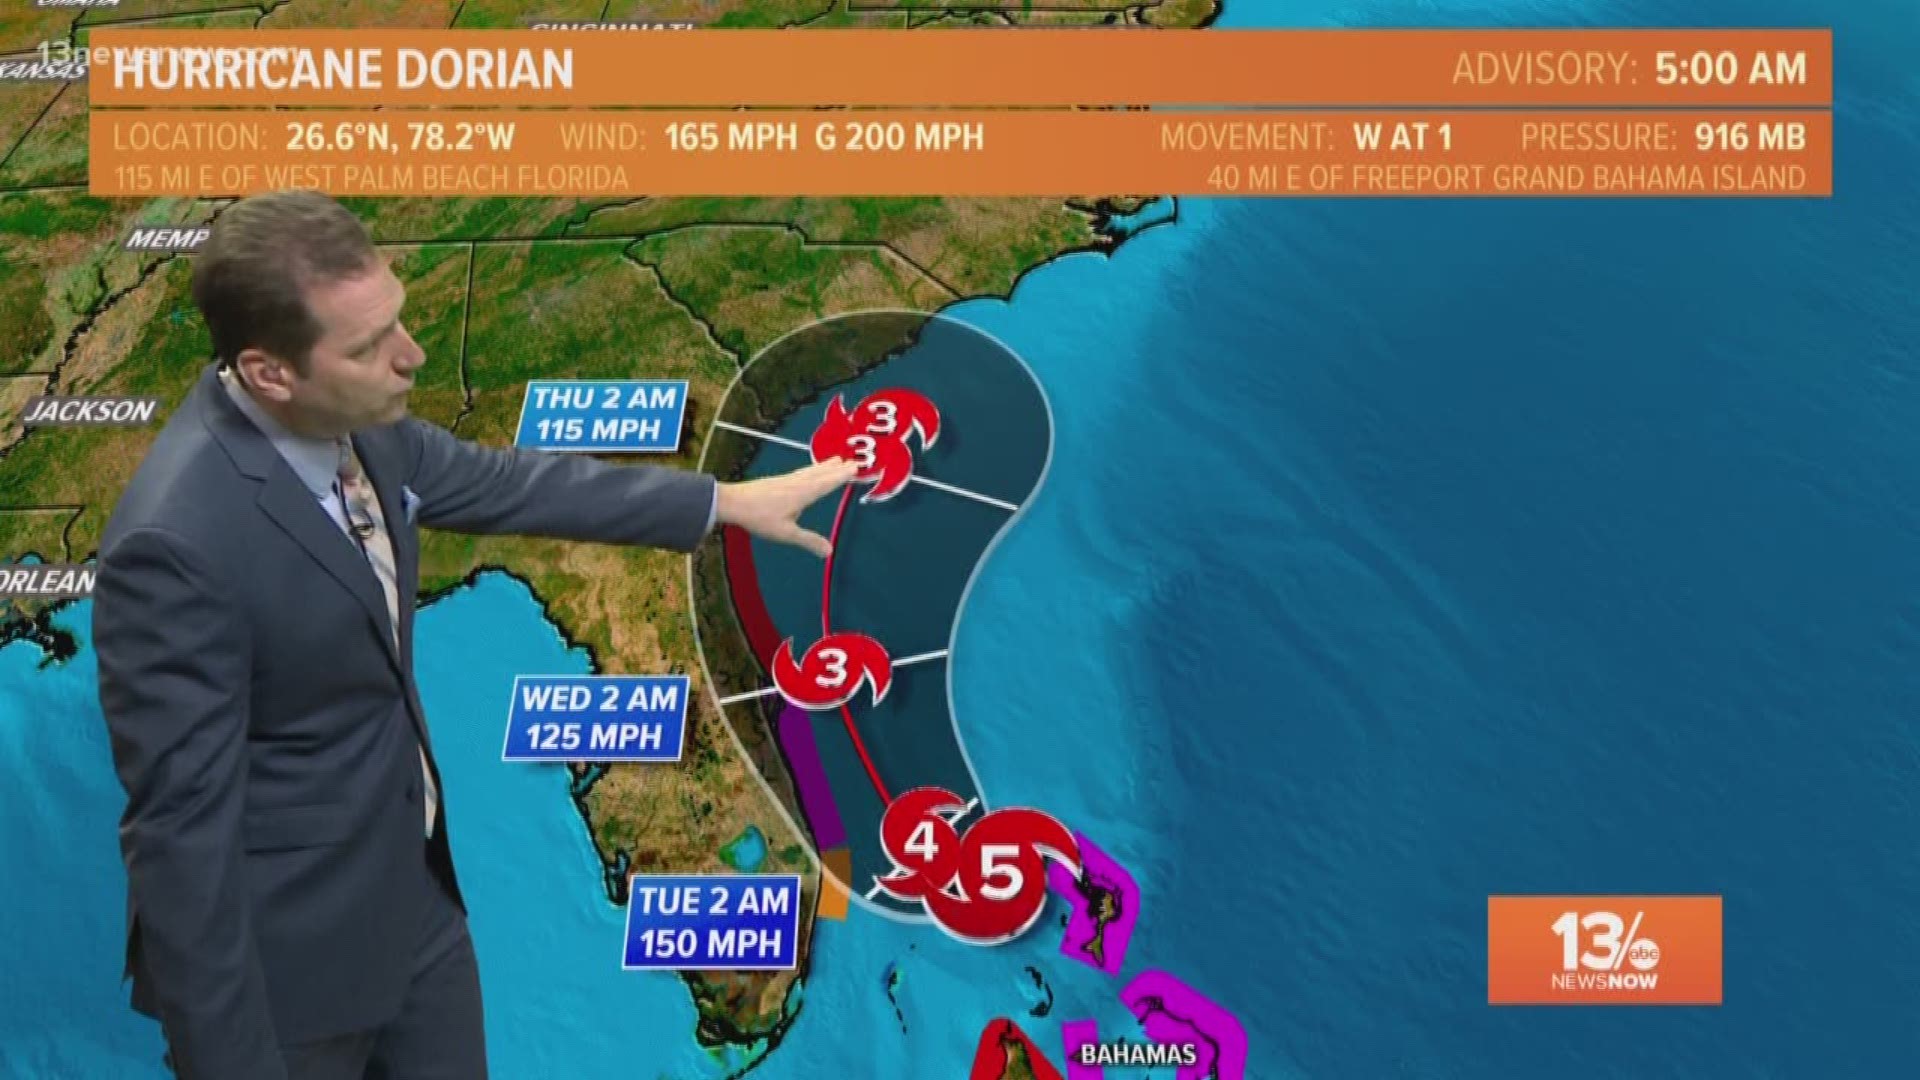 Hurricane Dorian continues to lash the northern Bahamas as it crawls westward toward the southeastern U.S. coast. The National Hurricane Center in Miami says the Category 5 storm's top sustained winds remain at 165 mph Monday morning, down Sunday's high of 185 mph. The center of the storm is around 40 miles east of Grand Bahama's largest city, Freeport, and 115 miles east of West Palm Beach, Florida.